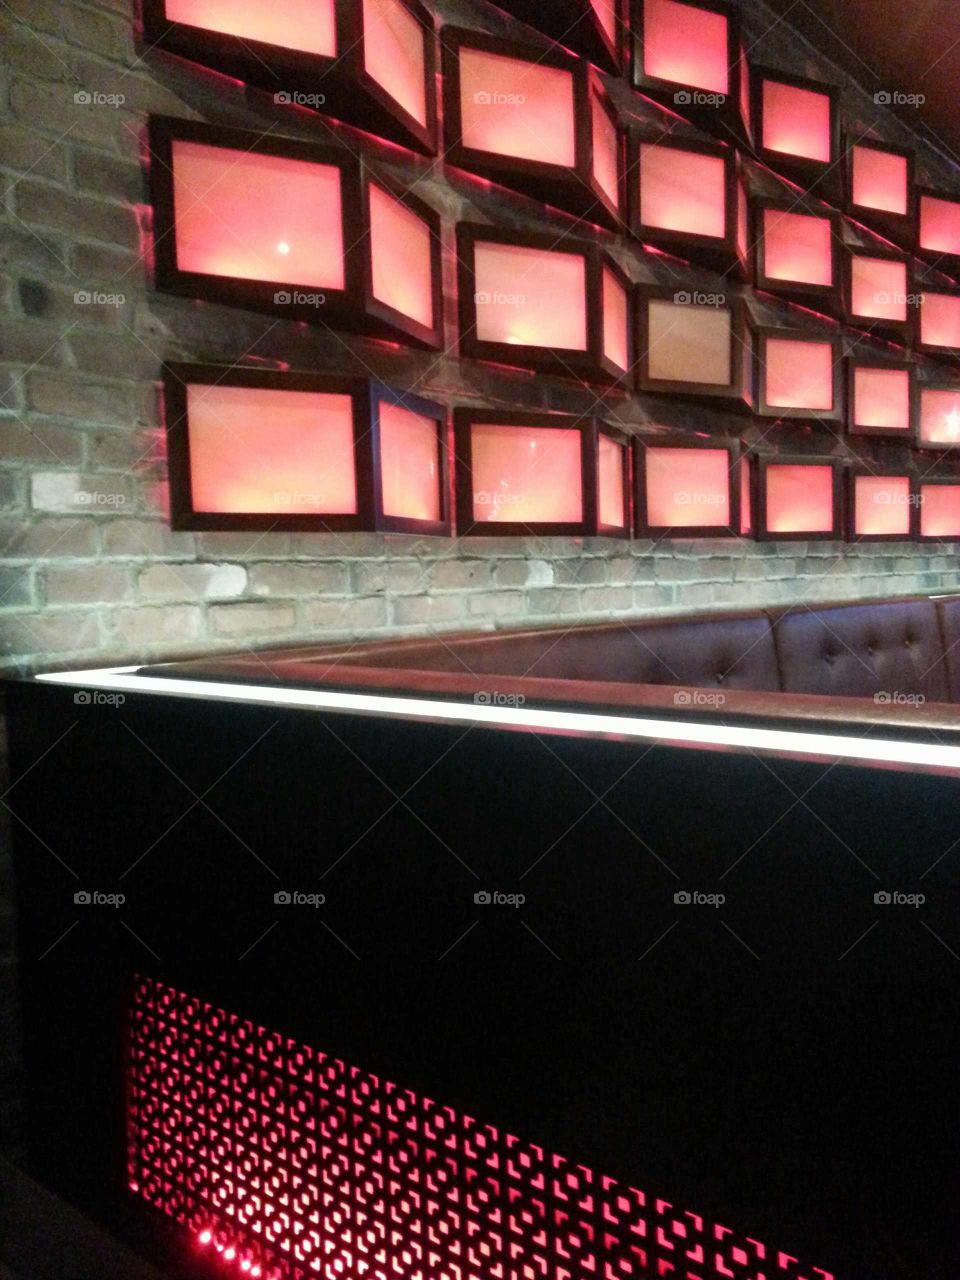 Red lights on a brick wall in a restaurant